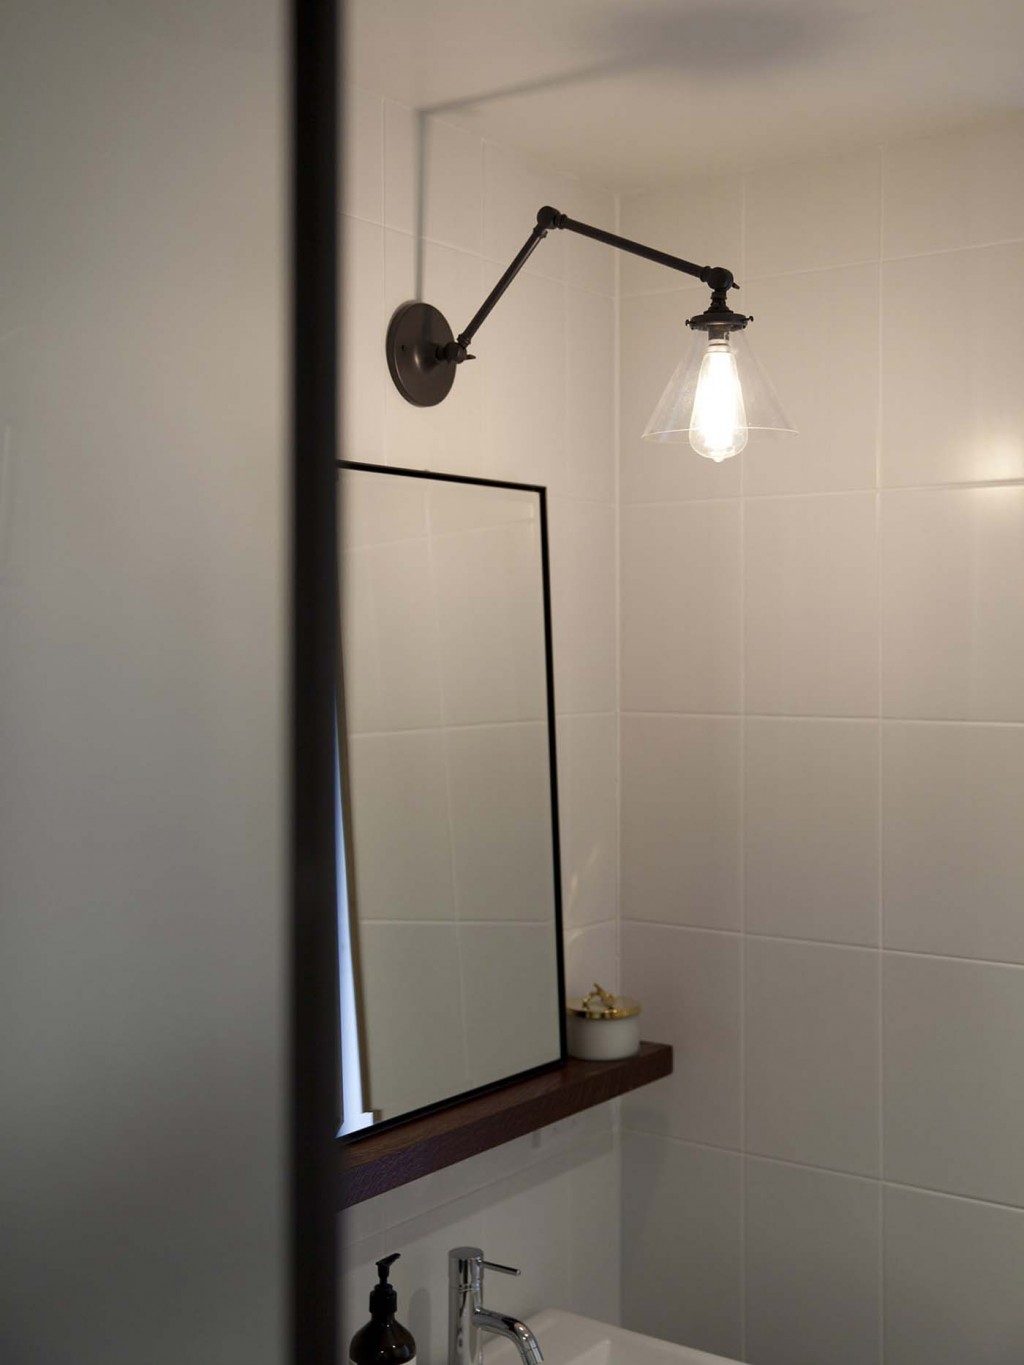 A Princeton 'Senior' wall sconce from Schoolhouse Electric is fixed to the wall above a simple wooden shelf holding a mirror custom-designed by Carroll. Photograph by David Straight.